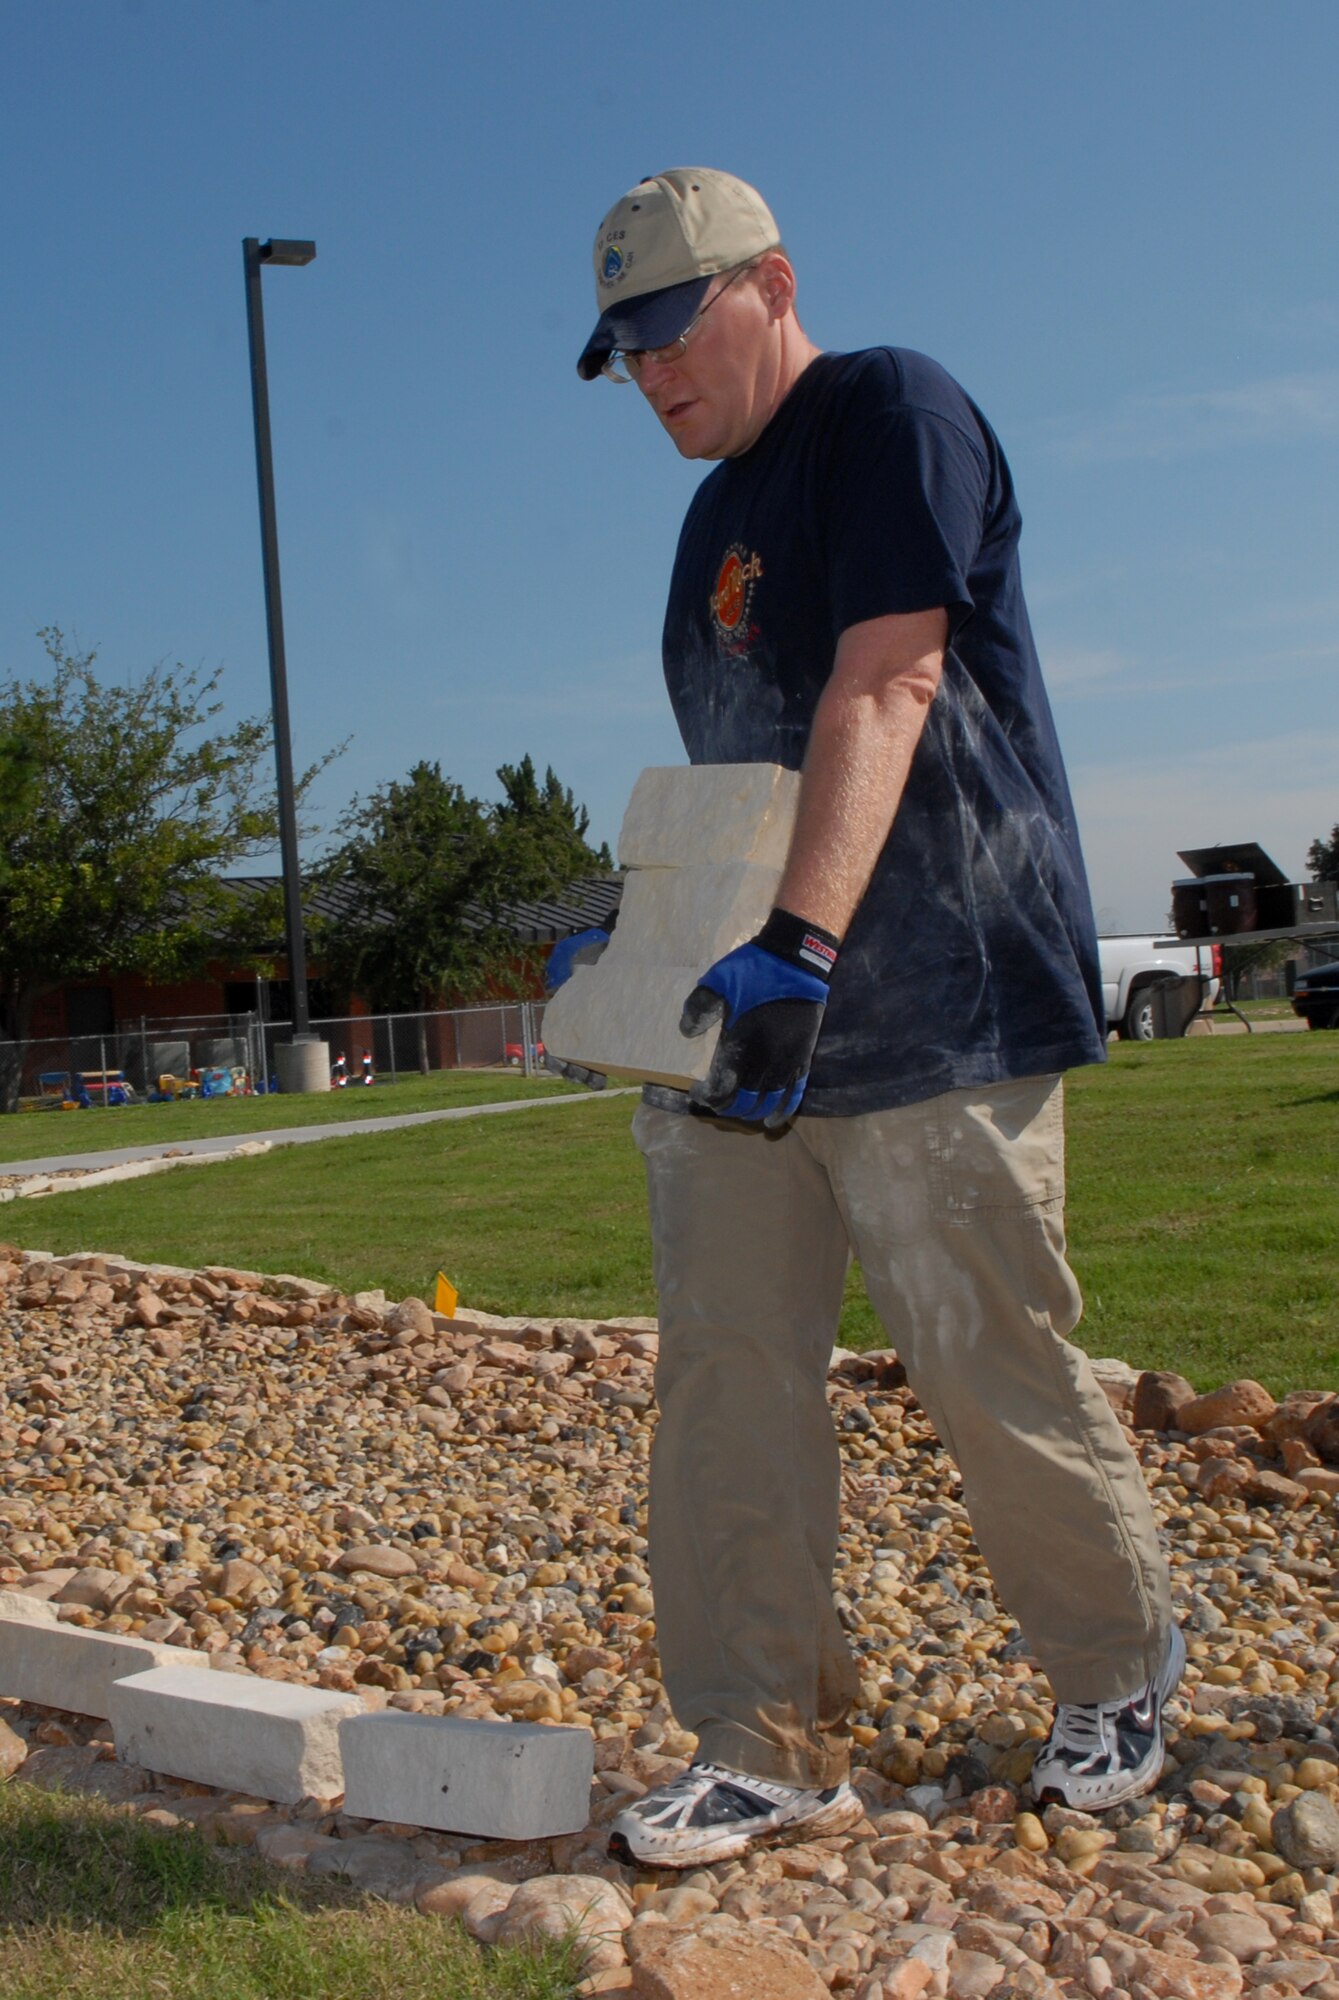 Staff Sgt. Kevin Rodgers, 17th Civil Engineer Squadron readiness flight, carries border rock for the dry riverbed at the Goodfellow School-Age Facility Sept. 13. Taylor Cambre, a Boy Scout from Troop 363, planned and led this undertaking as part of his Eagle Scout service project. Members of the 17 CES volunteered their time to help. (U.S. Air Force photo by Senior Airman Kasabyan Musal)